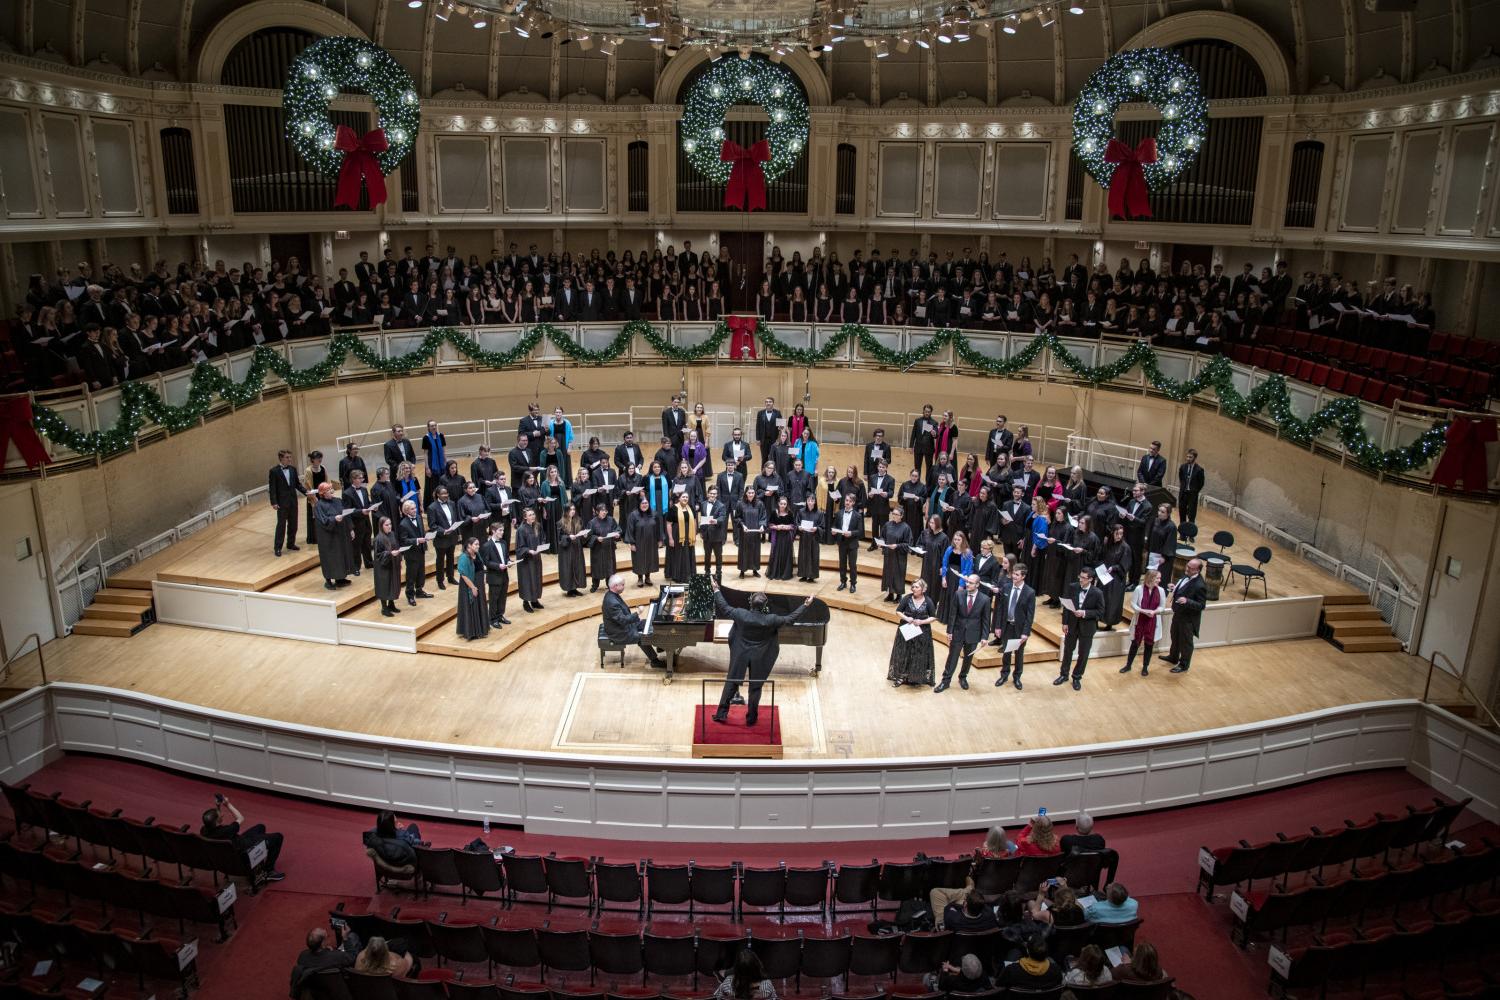 The <a href='http://qm.tianbo588.net'>全球十大赌钱排行app</a> Choir performs in the Chicago Symphony Hall.